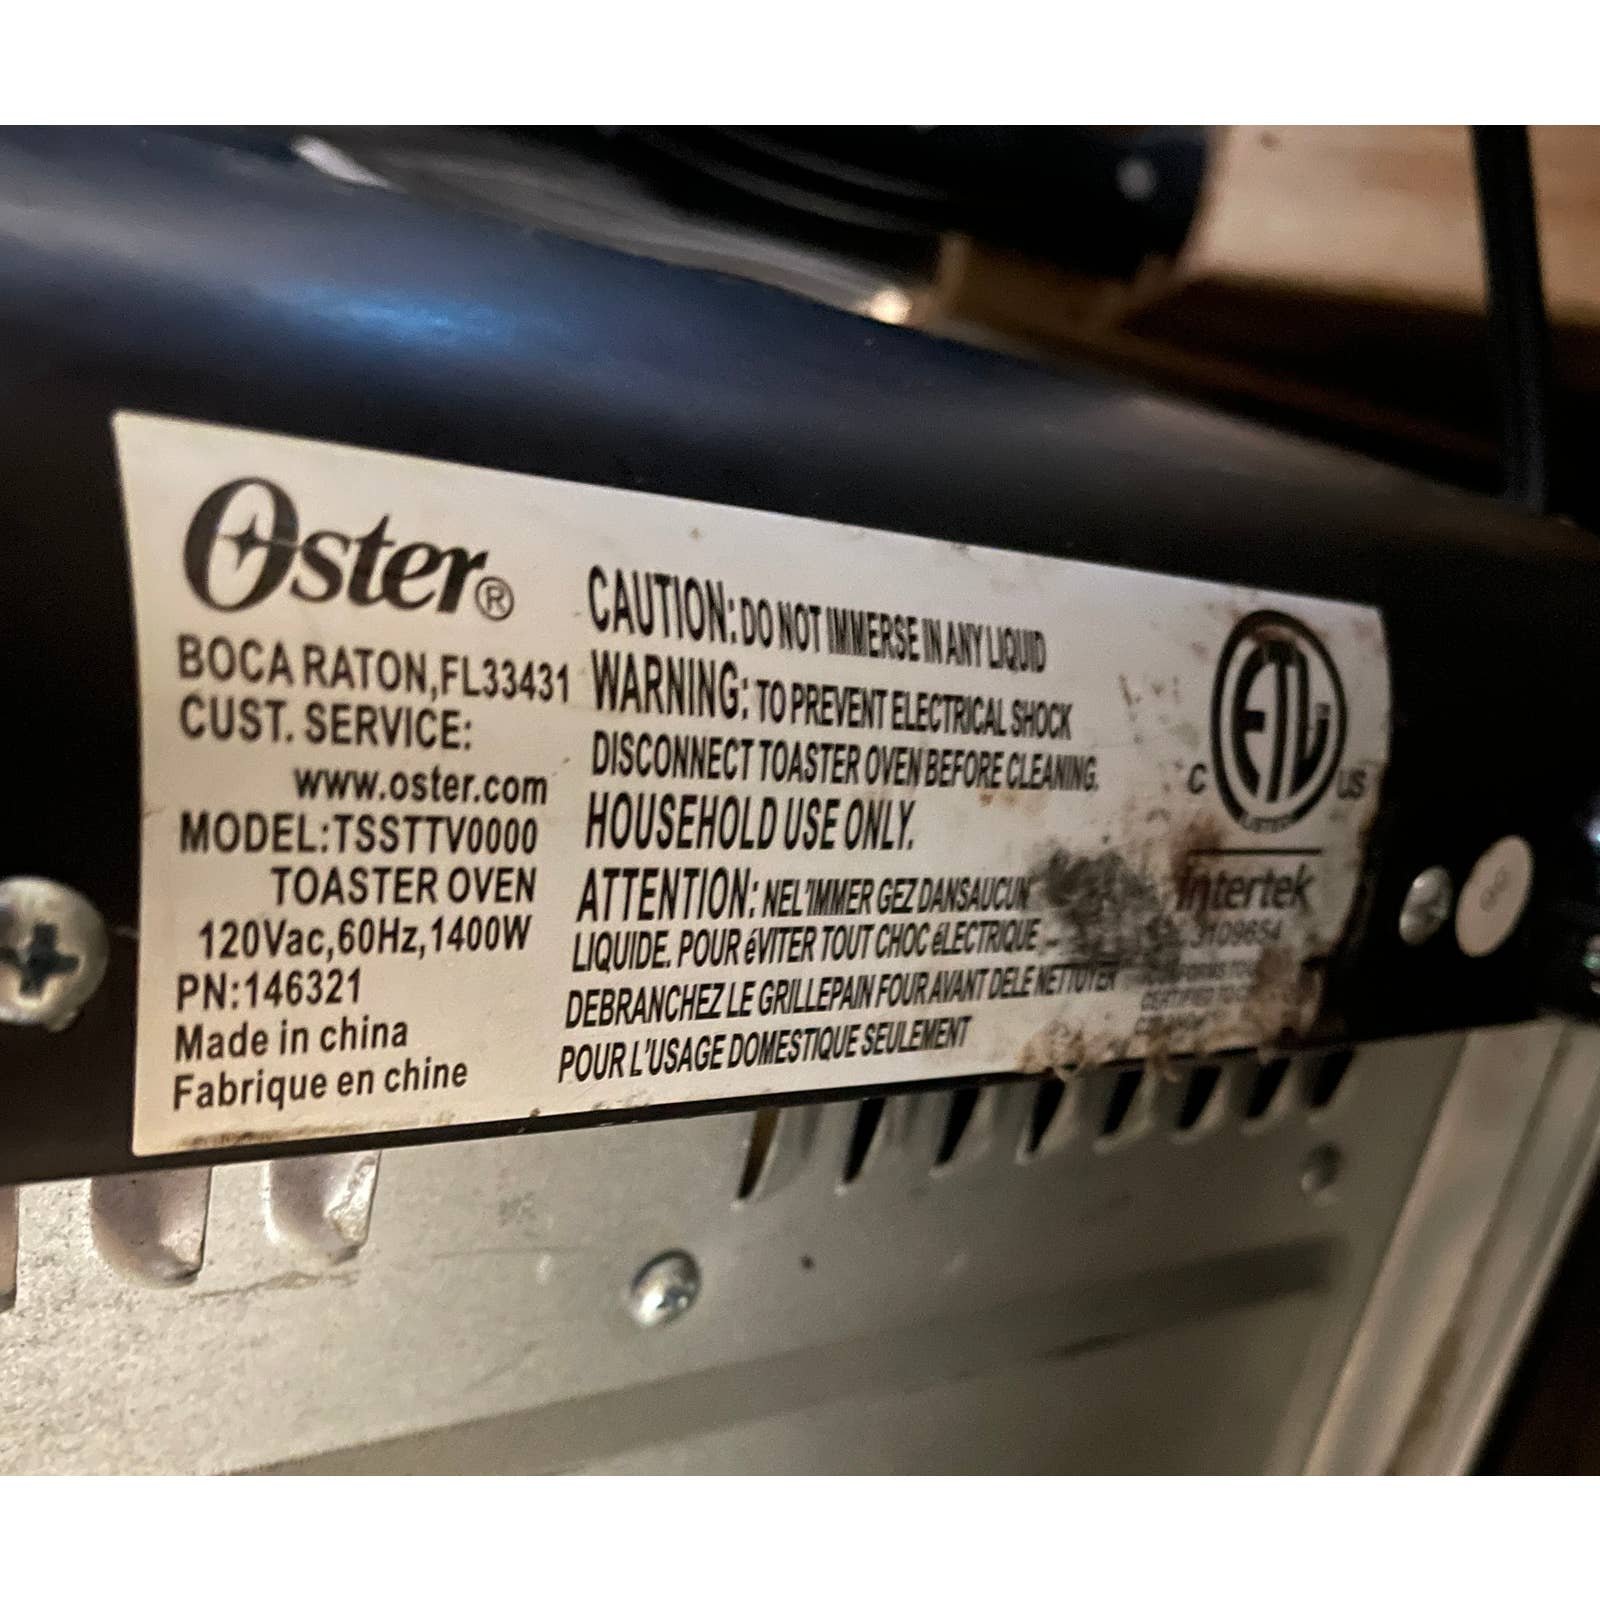 Oster Versatile Countertop Toaster Oven 1400W Chrome TSSTTV0000 Tested & Working drOtfNpO1